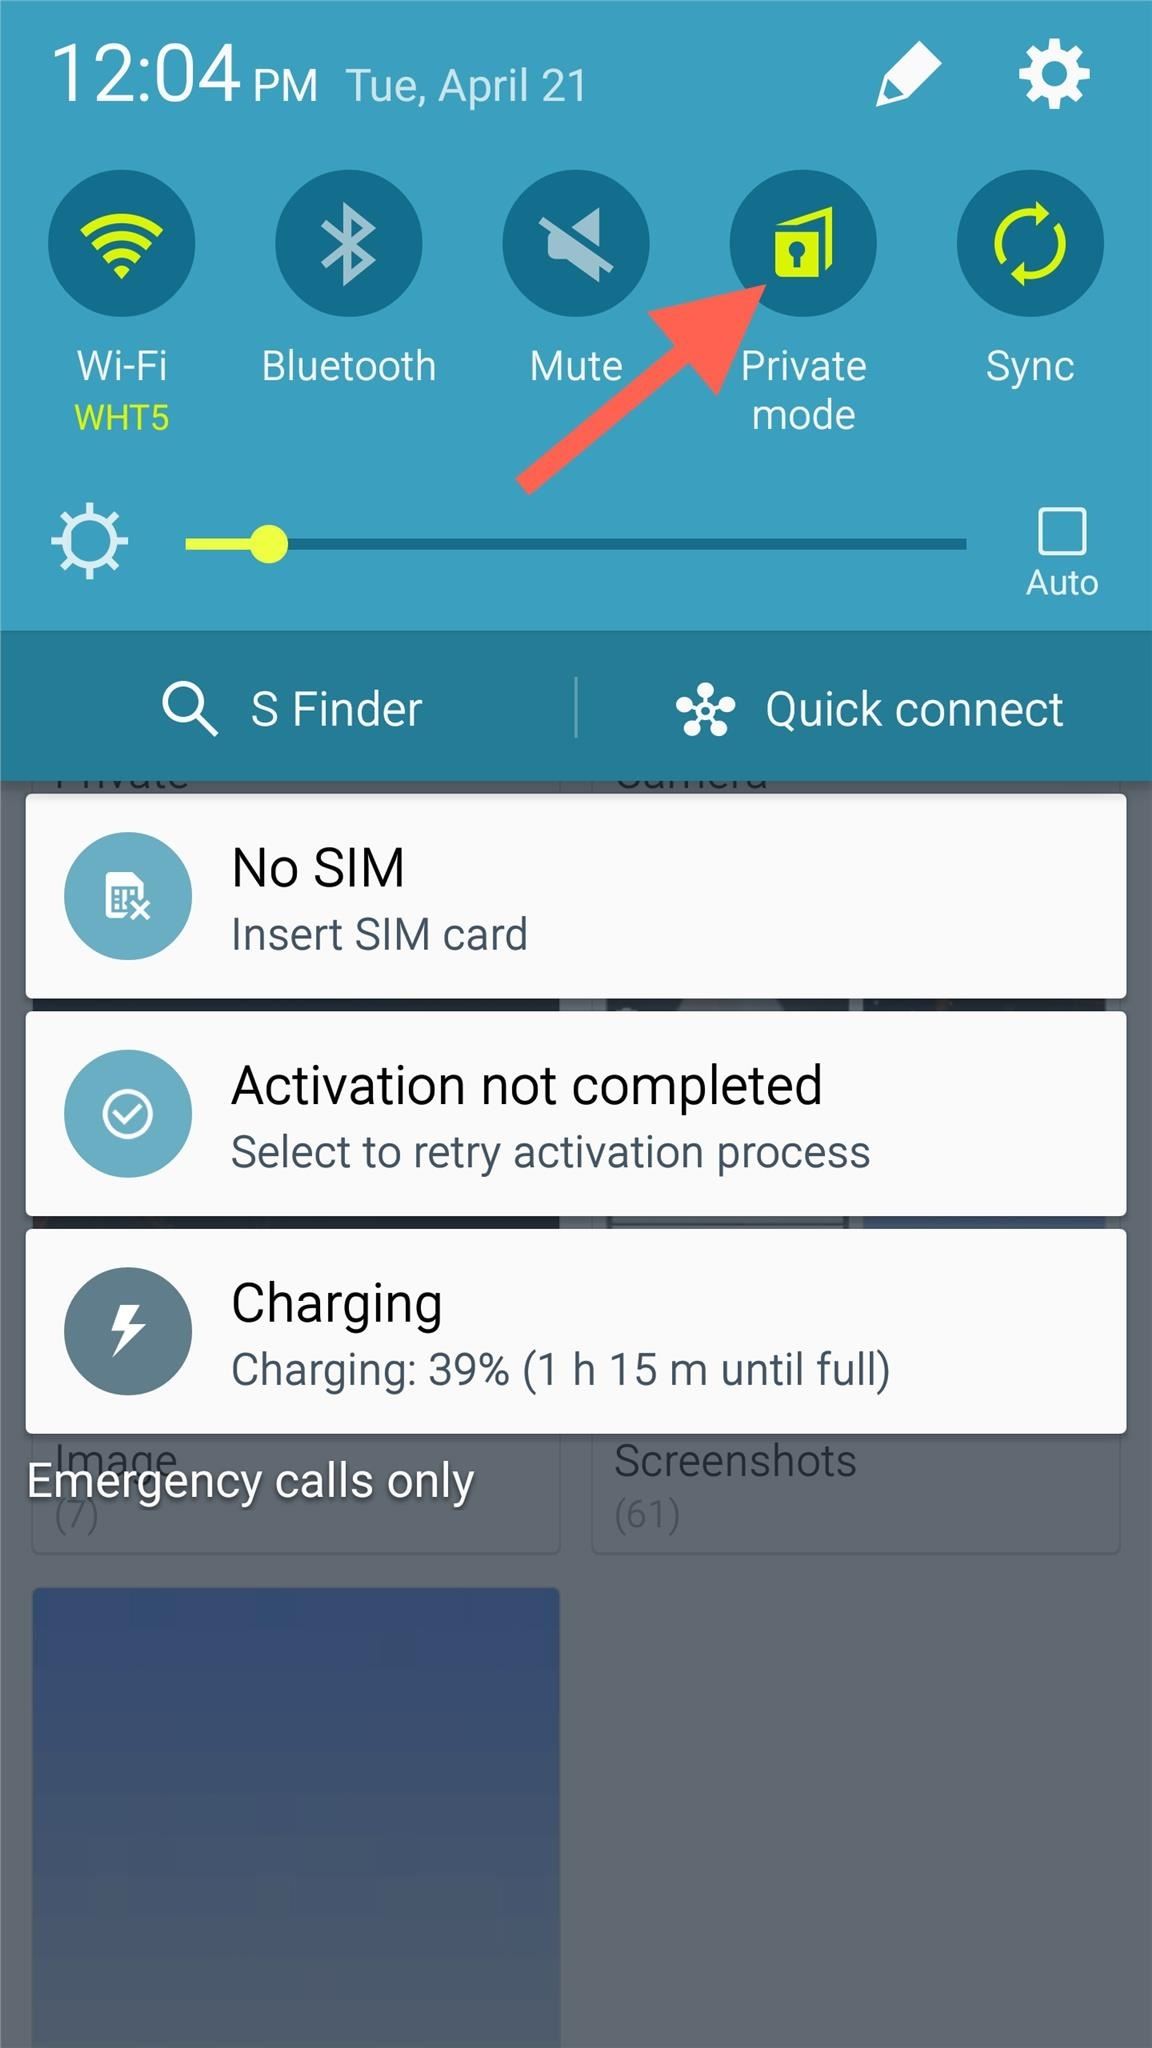 How to Secure Photos, Videos, & More on Your Galaxy S6 Using Private Mode